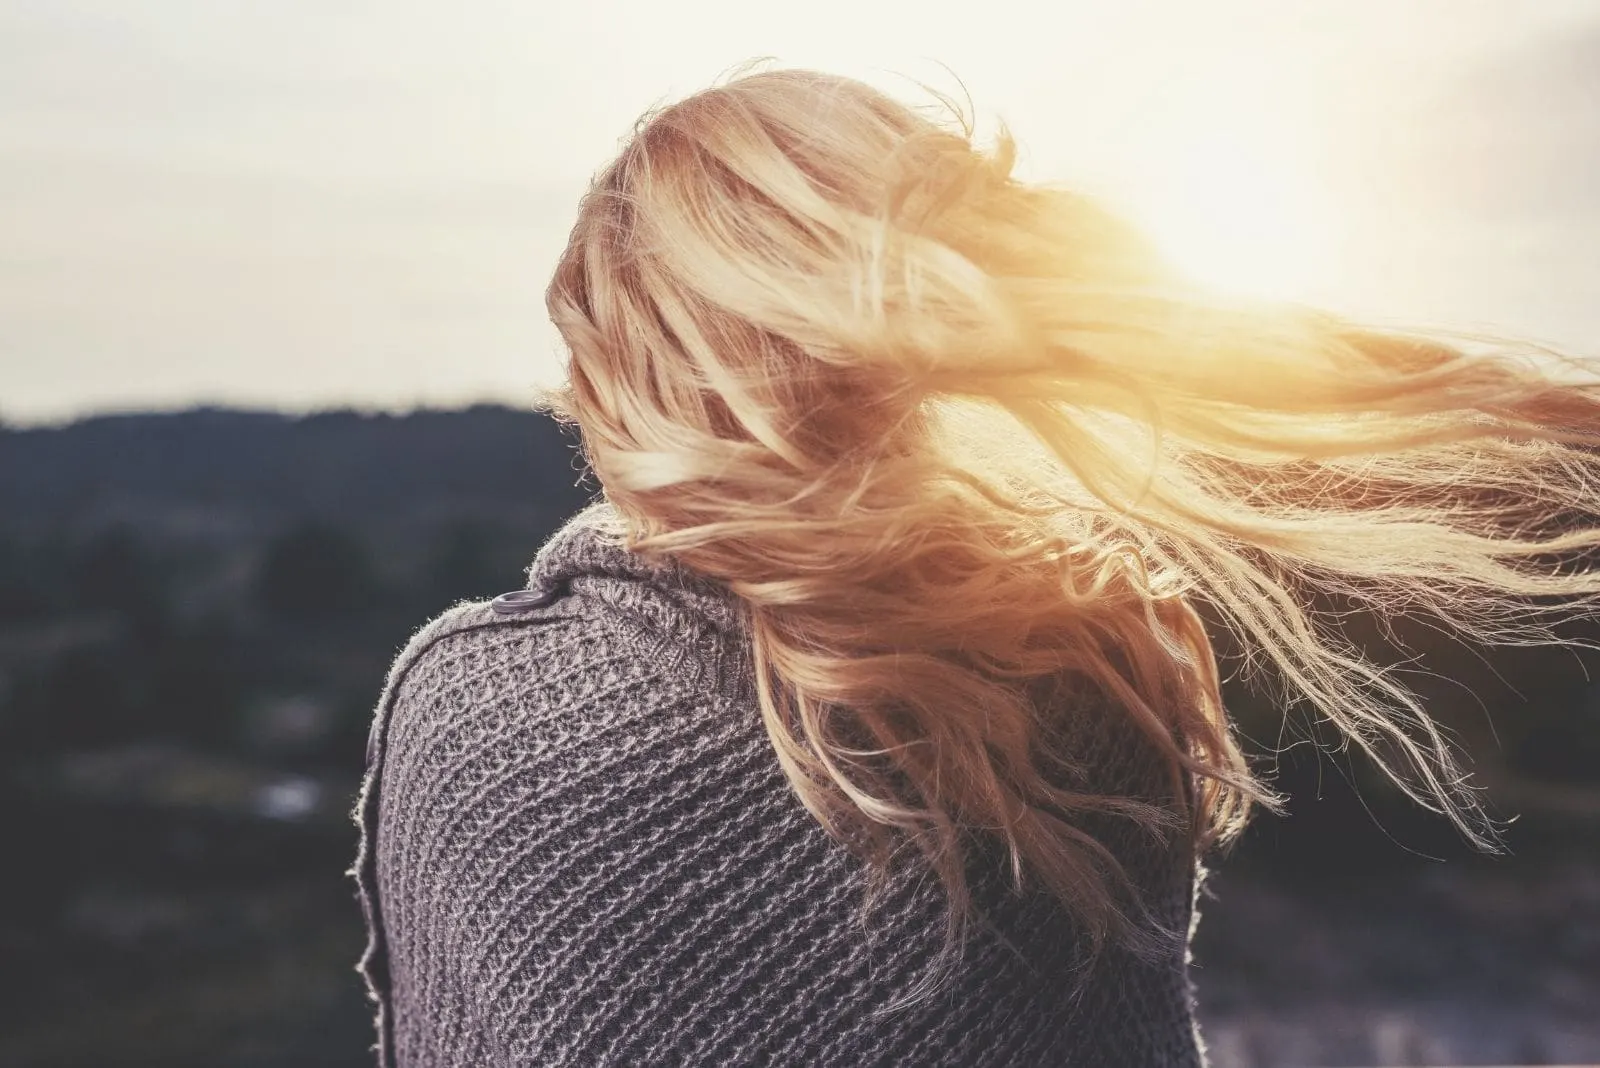 woman showing her back while facing the sunrise with blonde hair blown by the wind